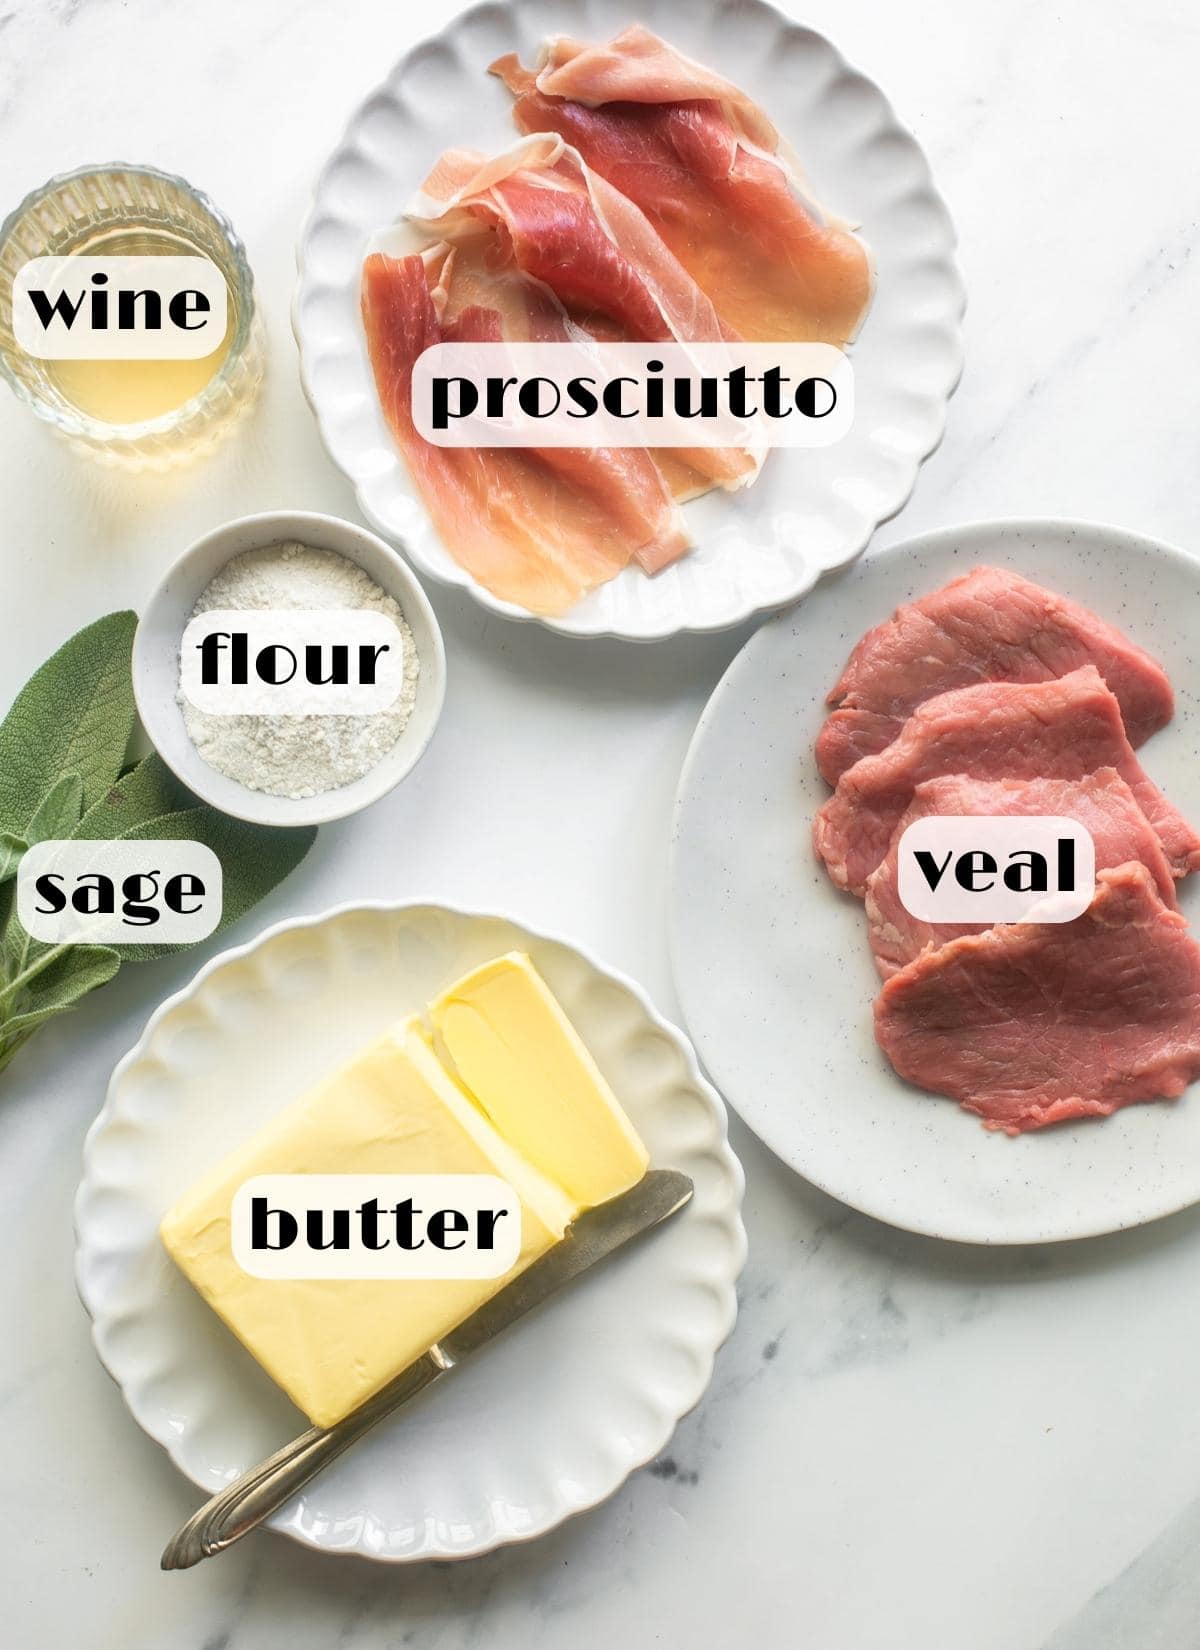 Veal saltimbocca ingredients: veal cutlets, prosciutto, sage leaves, white wine, flour and butter.